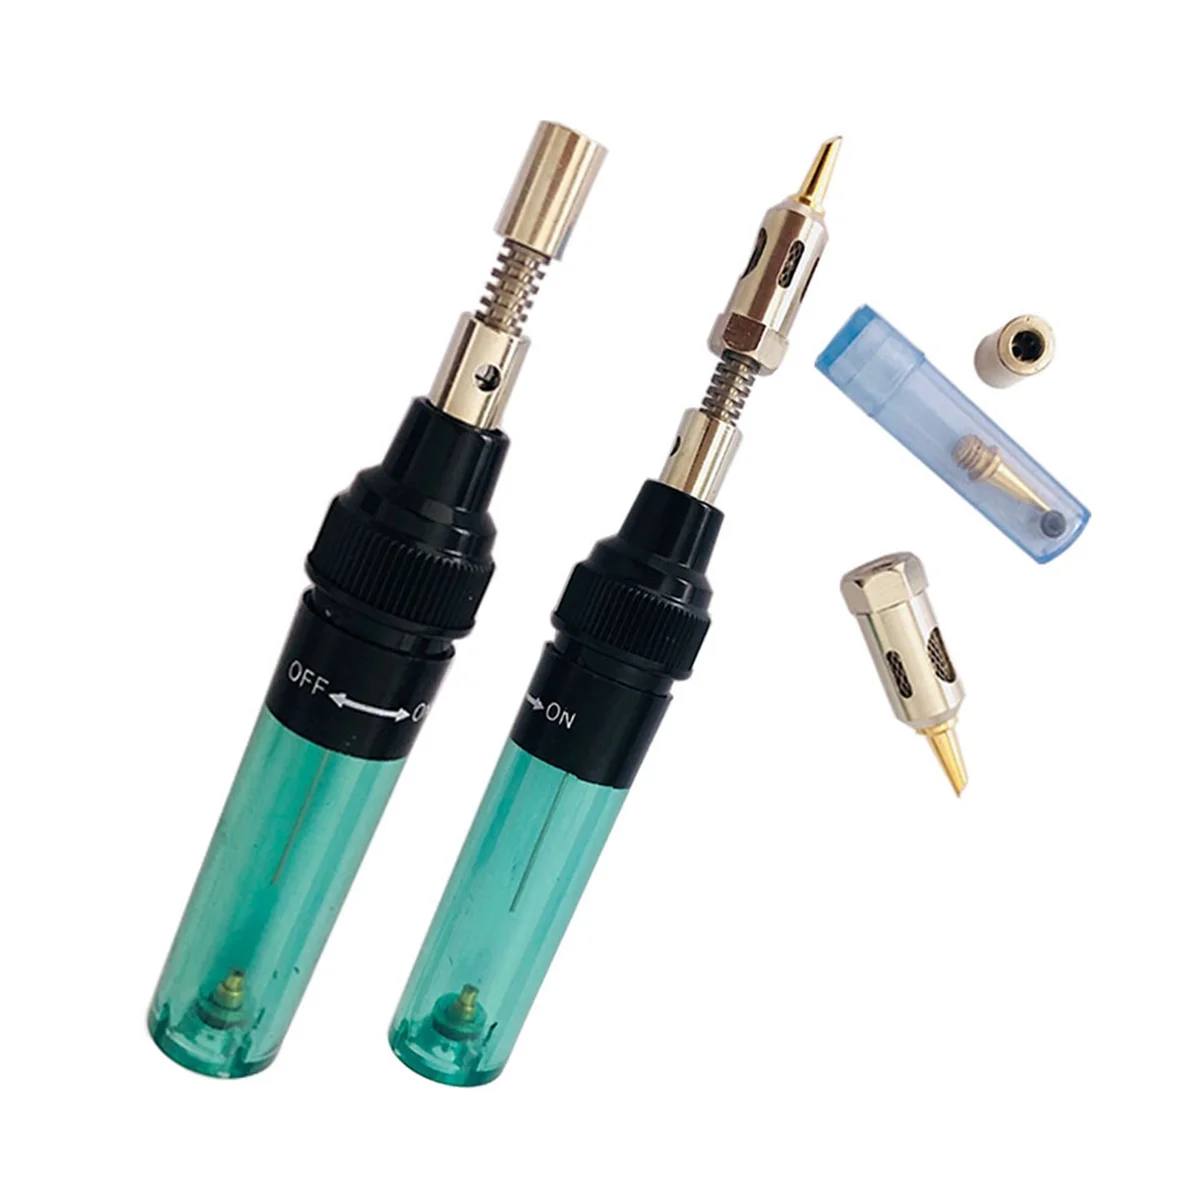 

1300℃ Celsius Butane 3 in 1 Gas Soldering Iron Cordless Butane Gas Welding Pen Welding Pen Burner Welding Kit A